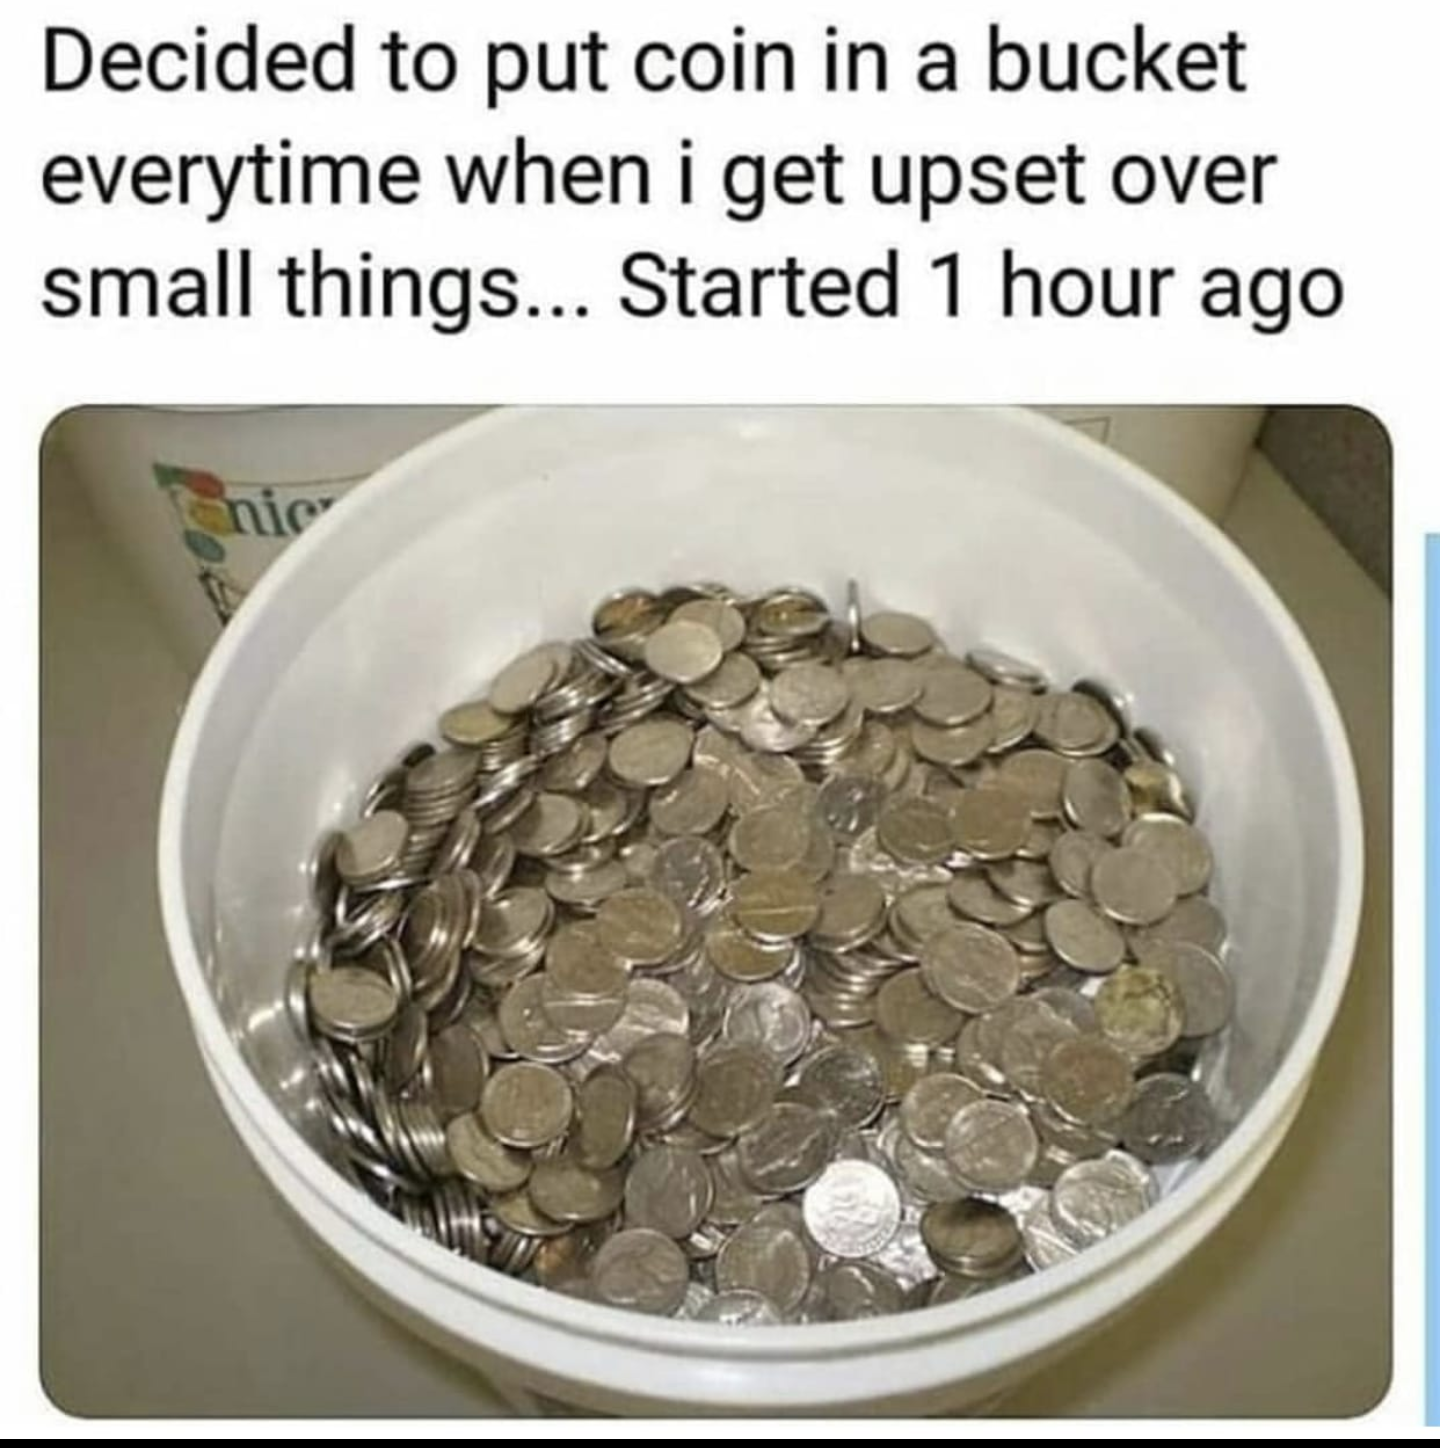 decided to put a coin in a bucket - Decided to put coin in a bucket everytime when i get upset over small things... Started 1 hour ago